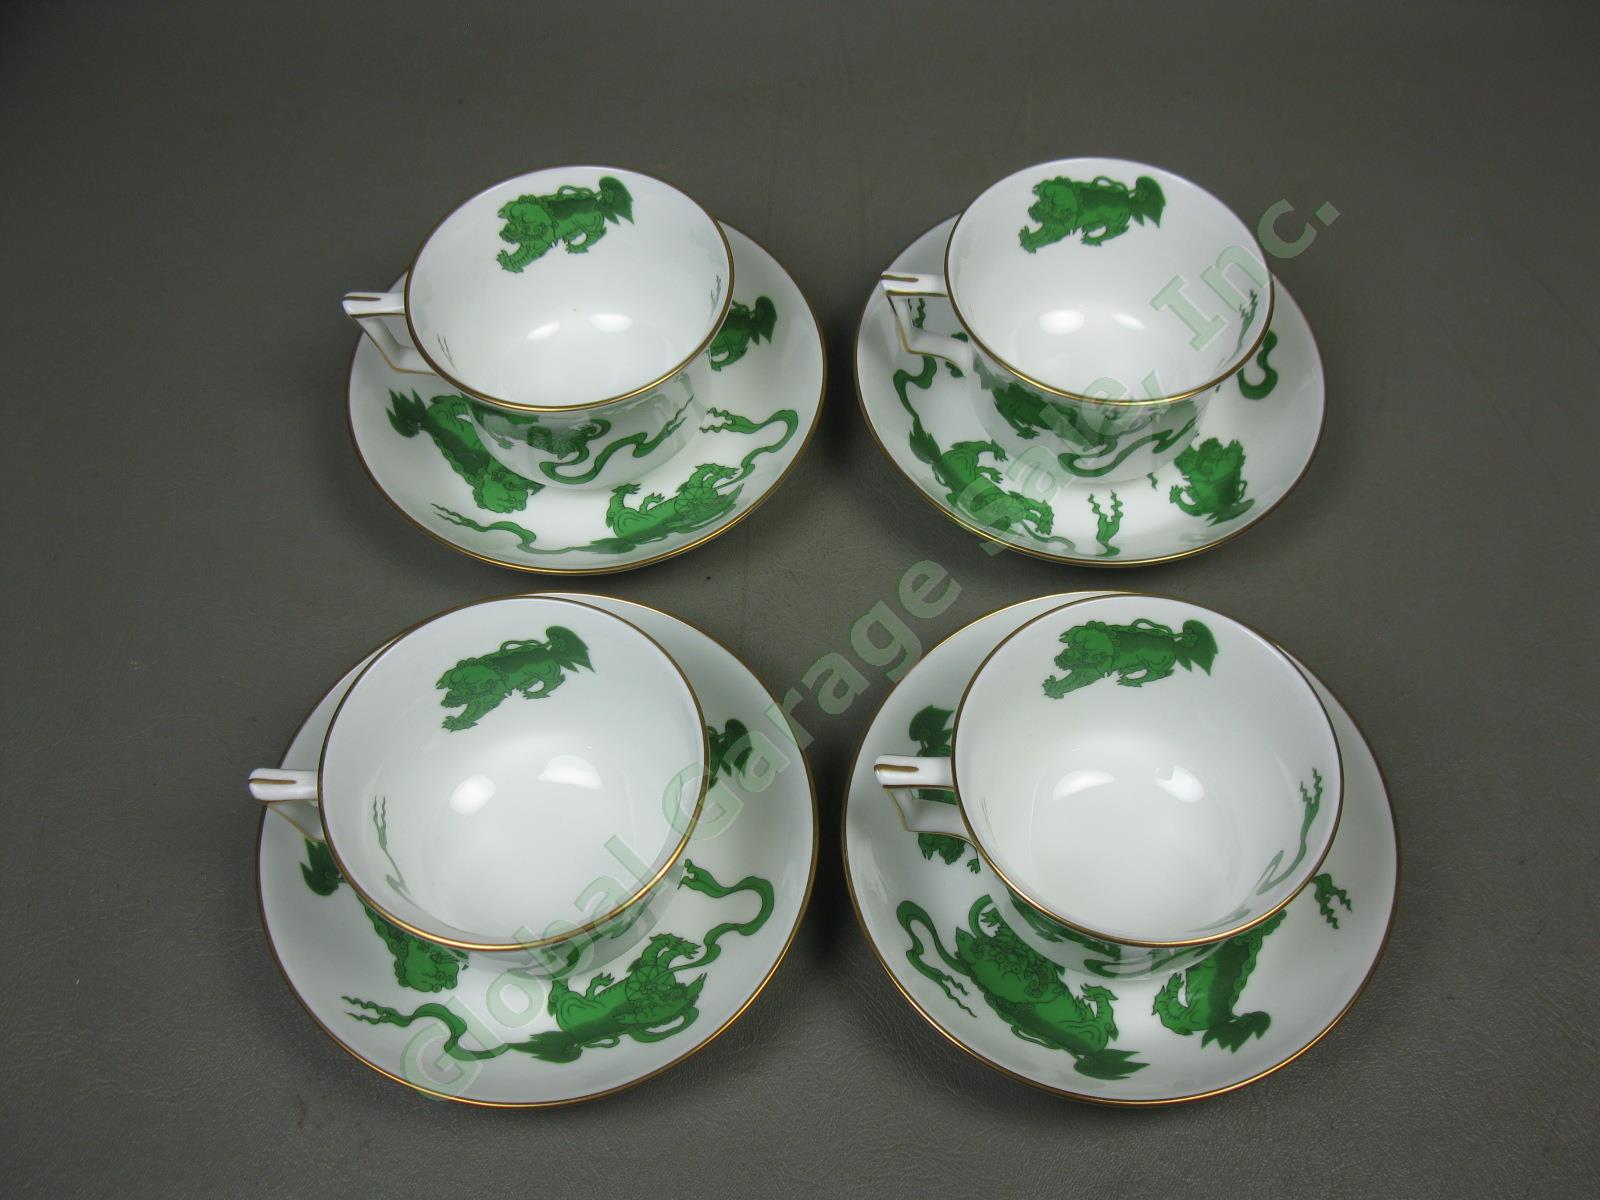 4 Wedgwood England Bone China Chinese Tigers Green Coffee Cups & Saucers Set Lot 2